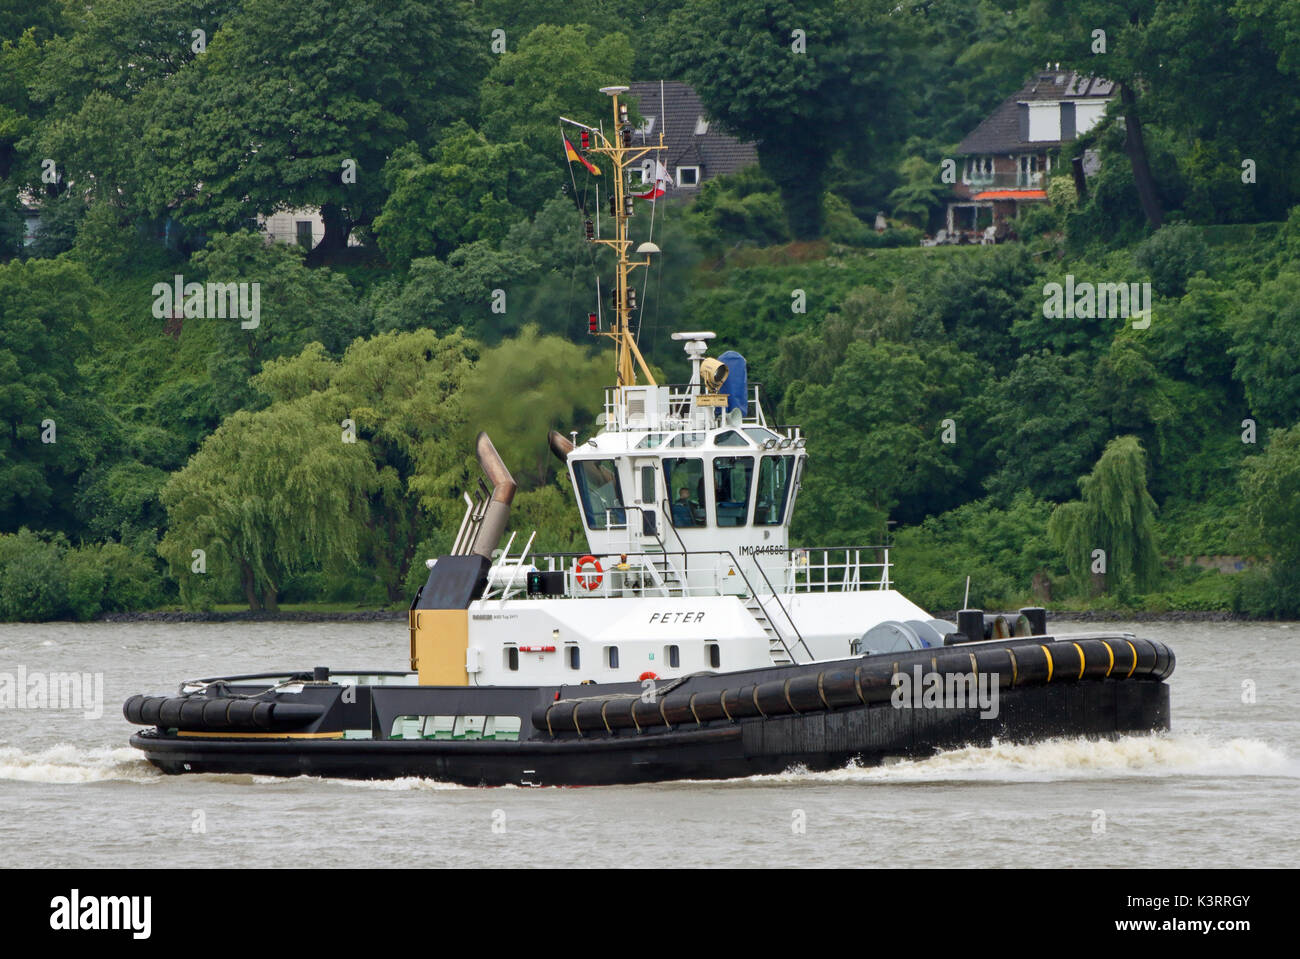 The harbor tug Peter works in the port of Hamburg. Stock Photo